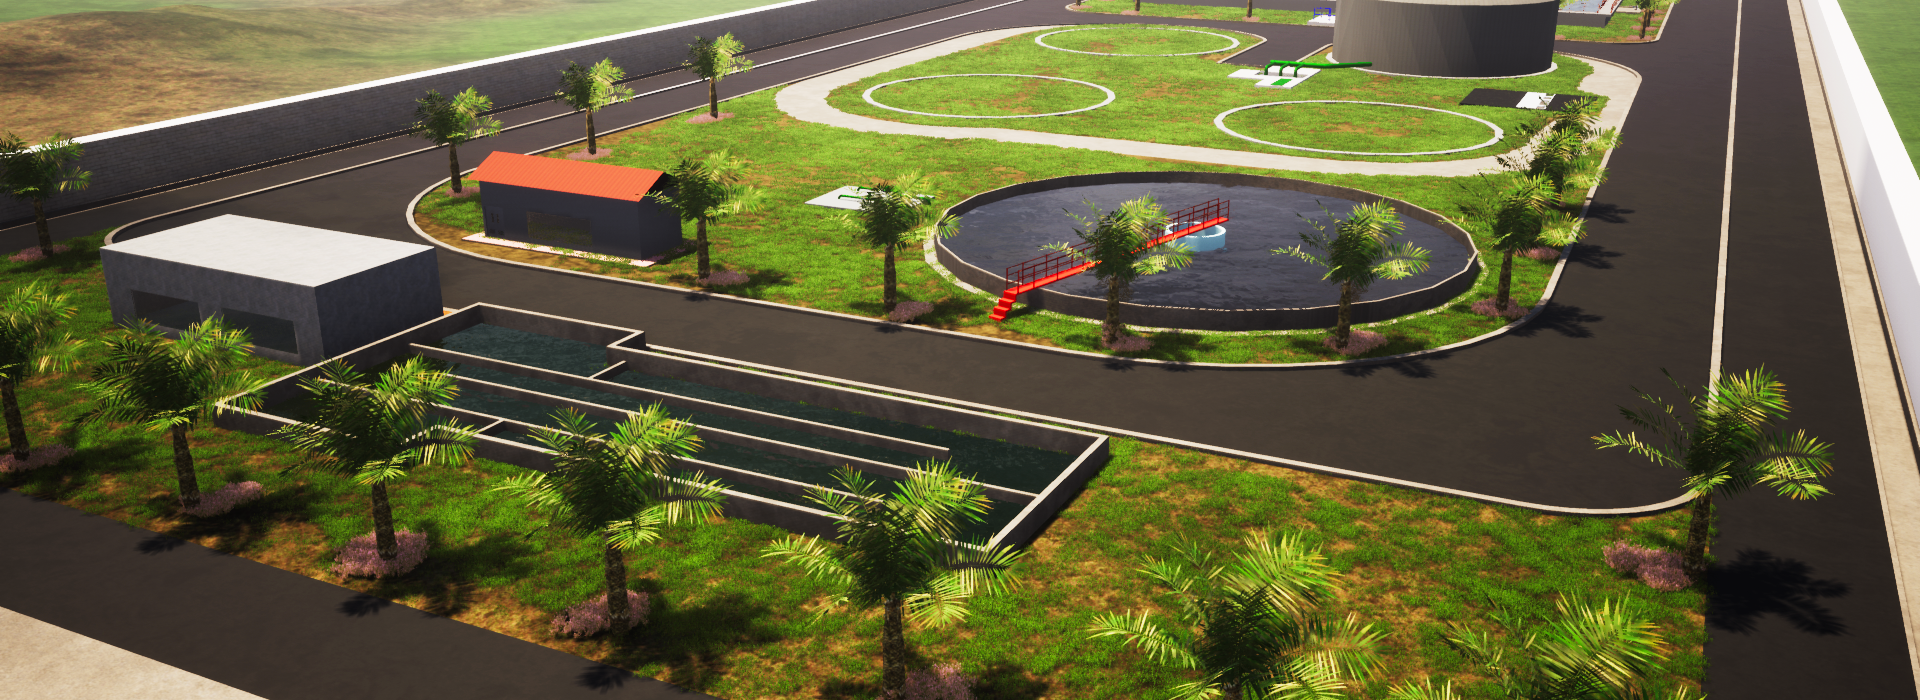 McConnell Dowell wins the Palembang Waste Water Treatment Plant Project